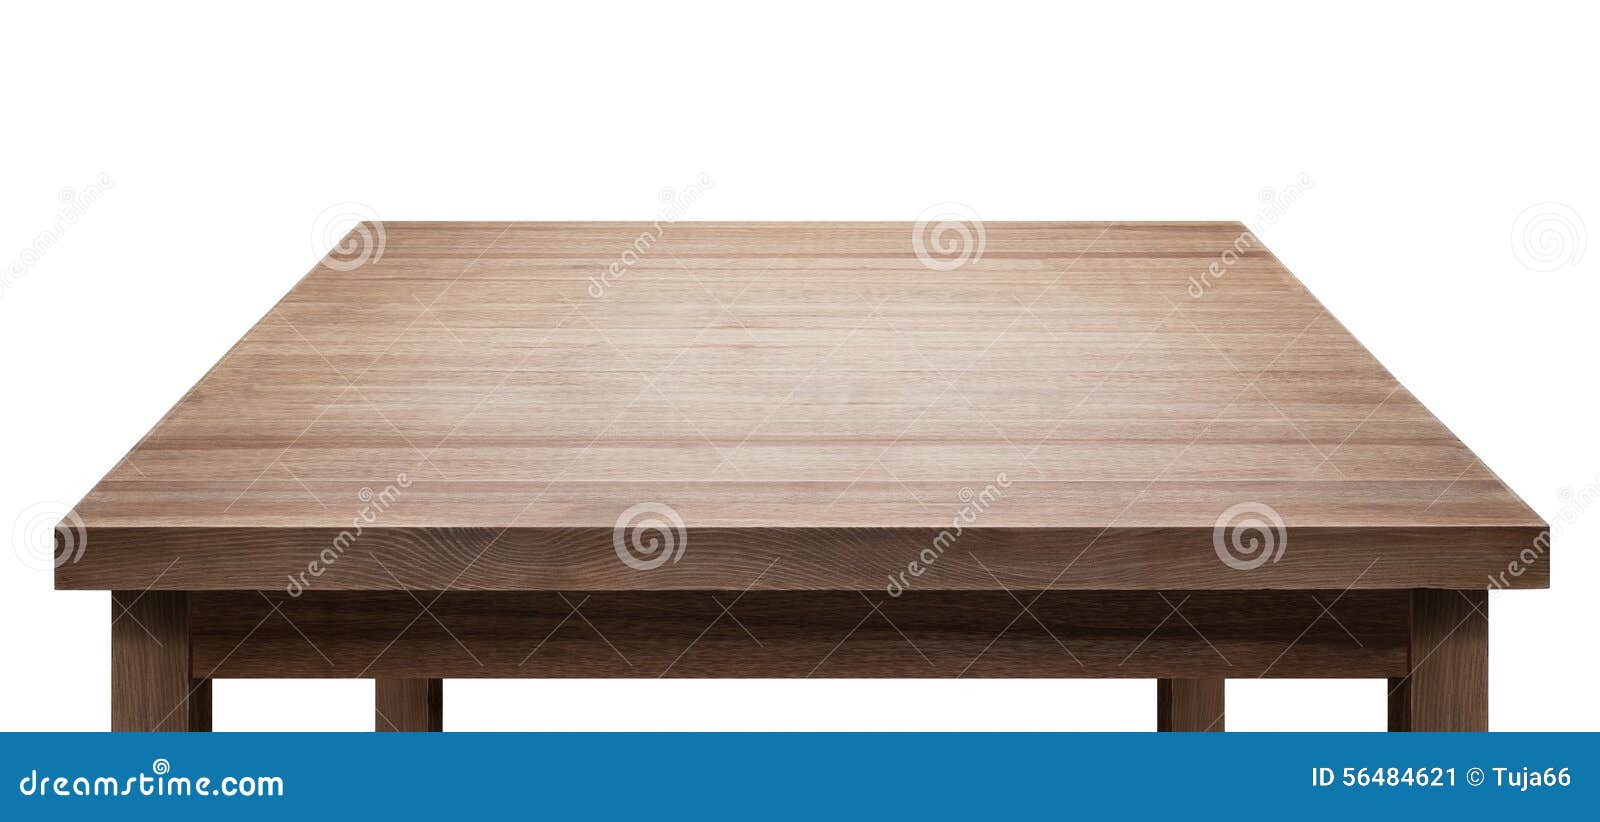 Wooden Table Photos, Download The BEST Free Wooden Table Stock